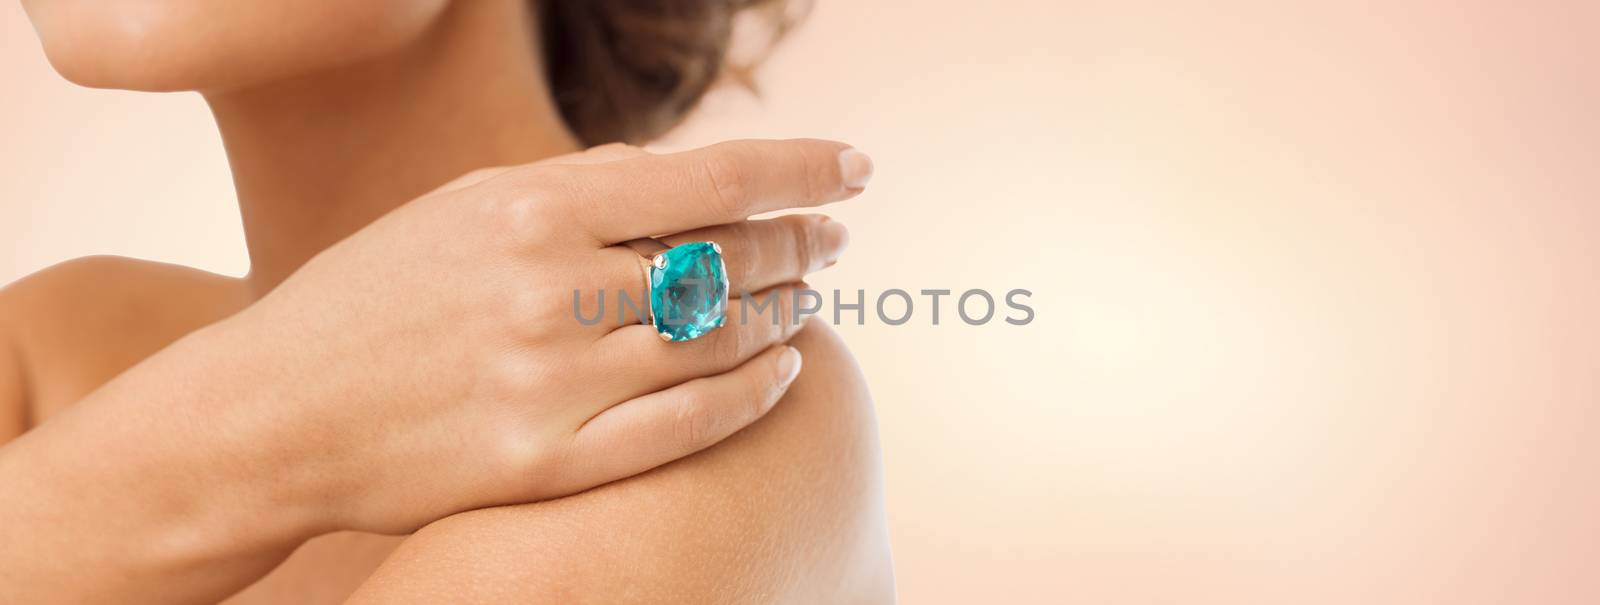 beauty, jewelry, people and accessories concept - close up of woman with cocktail ring on hand over beige background